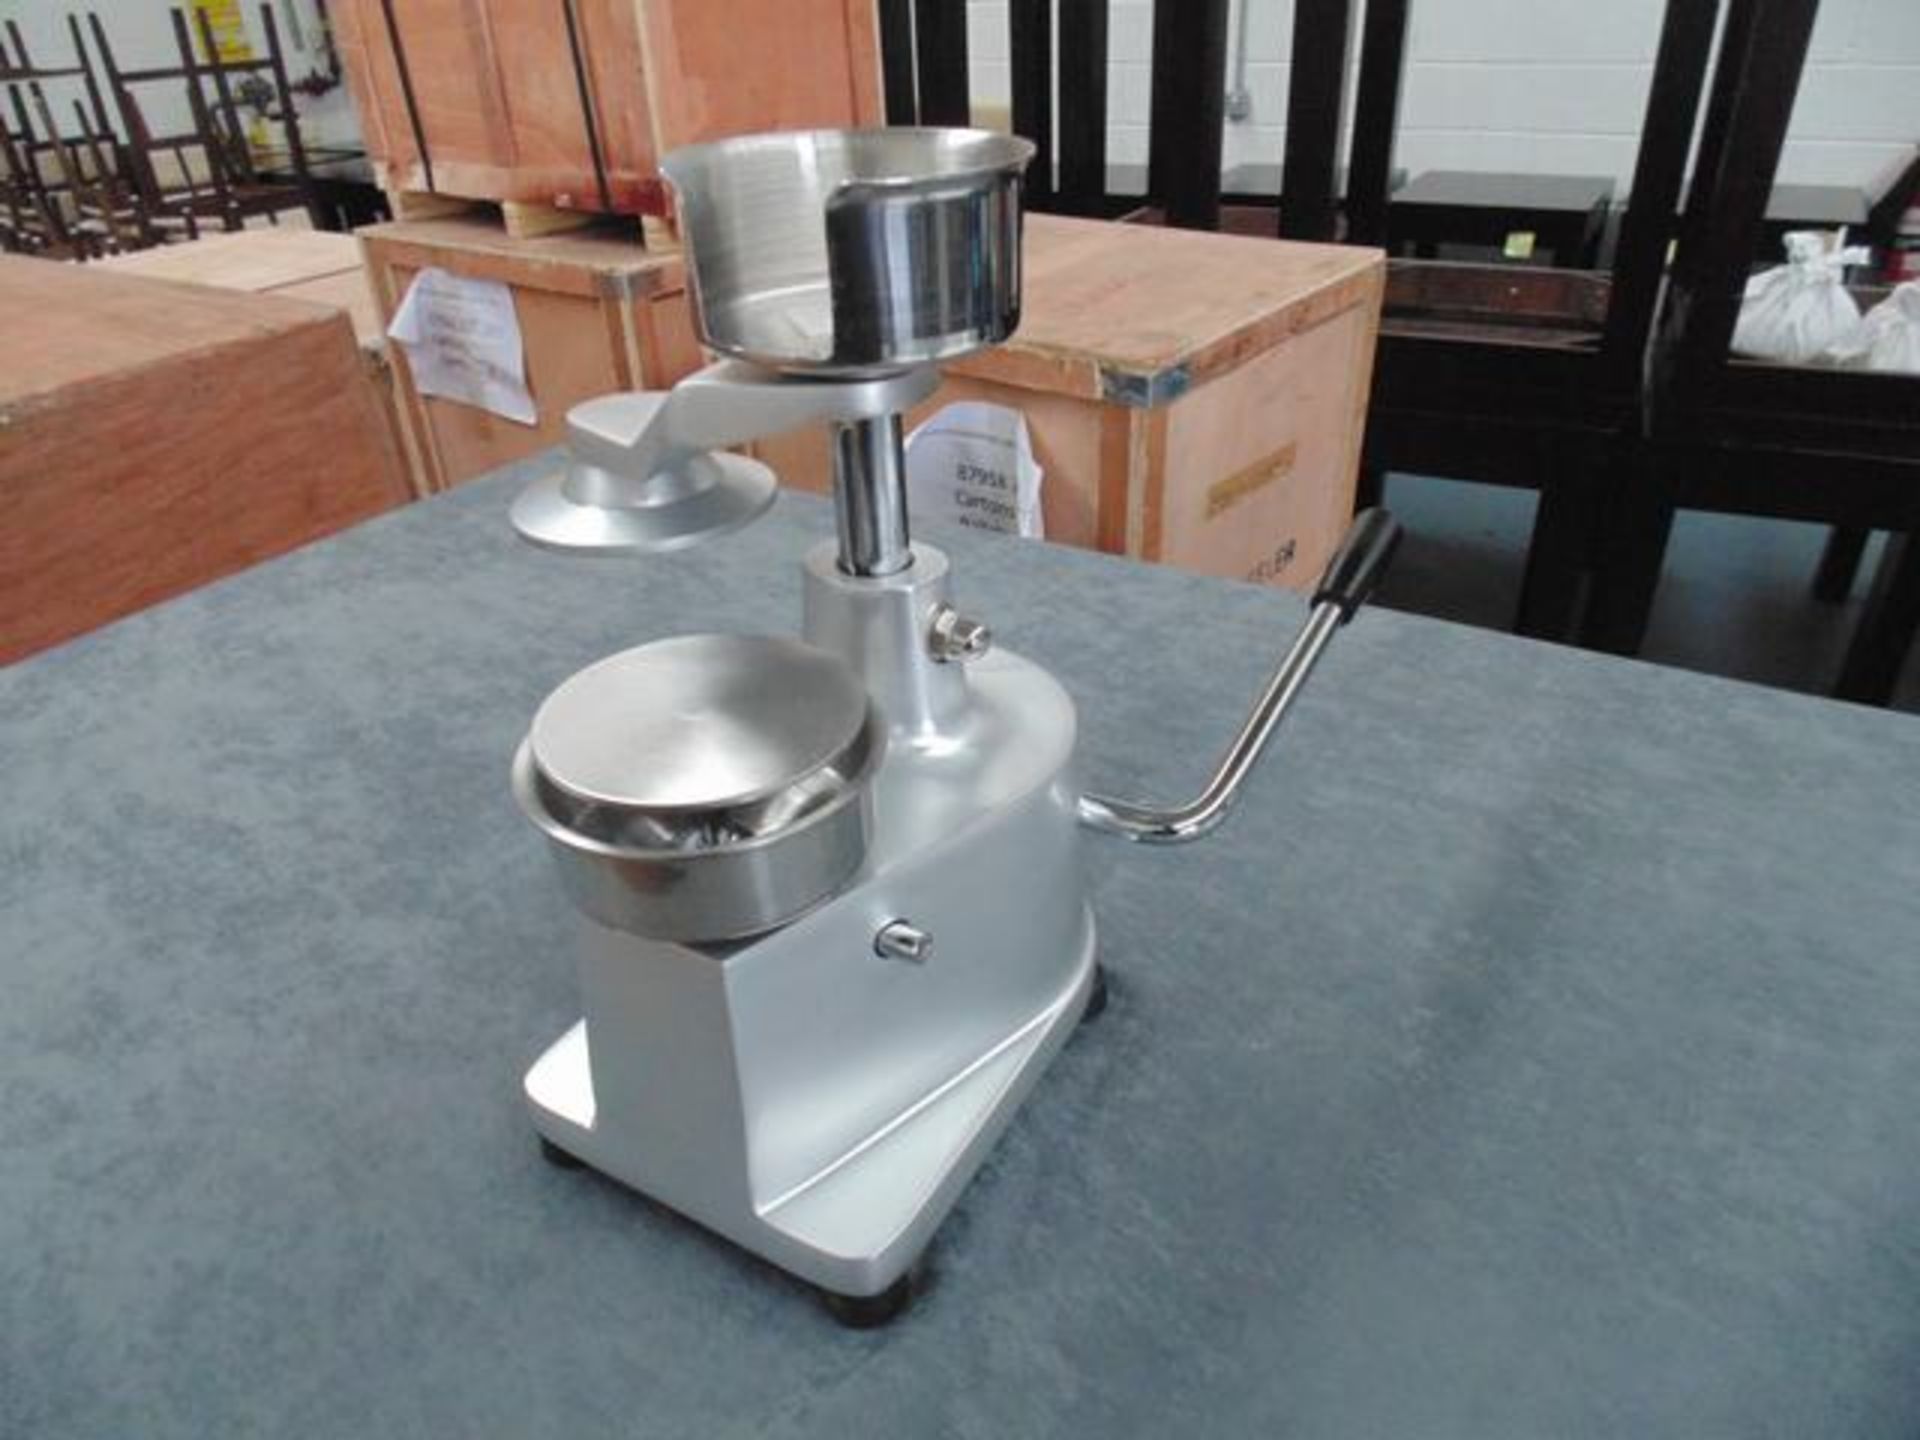 Counter top commercial patty burger former 100mm diameter non-stick plate press forms meat fast - Image 2 of 2